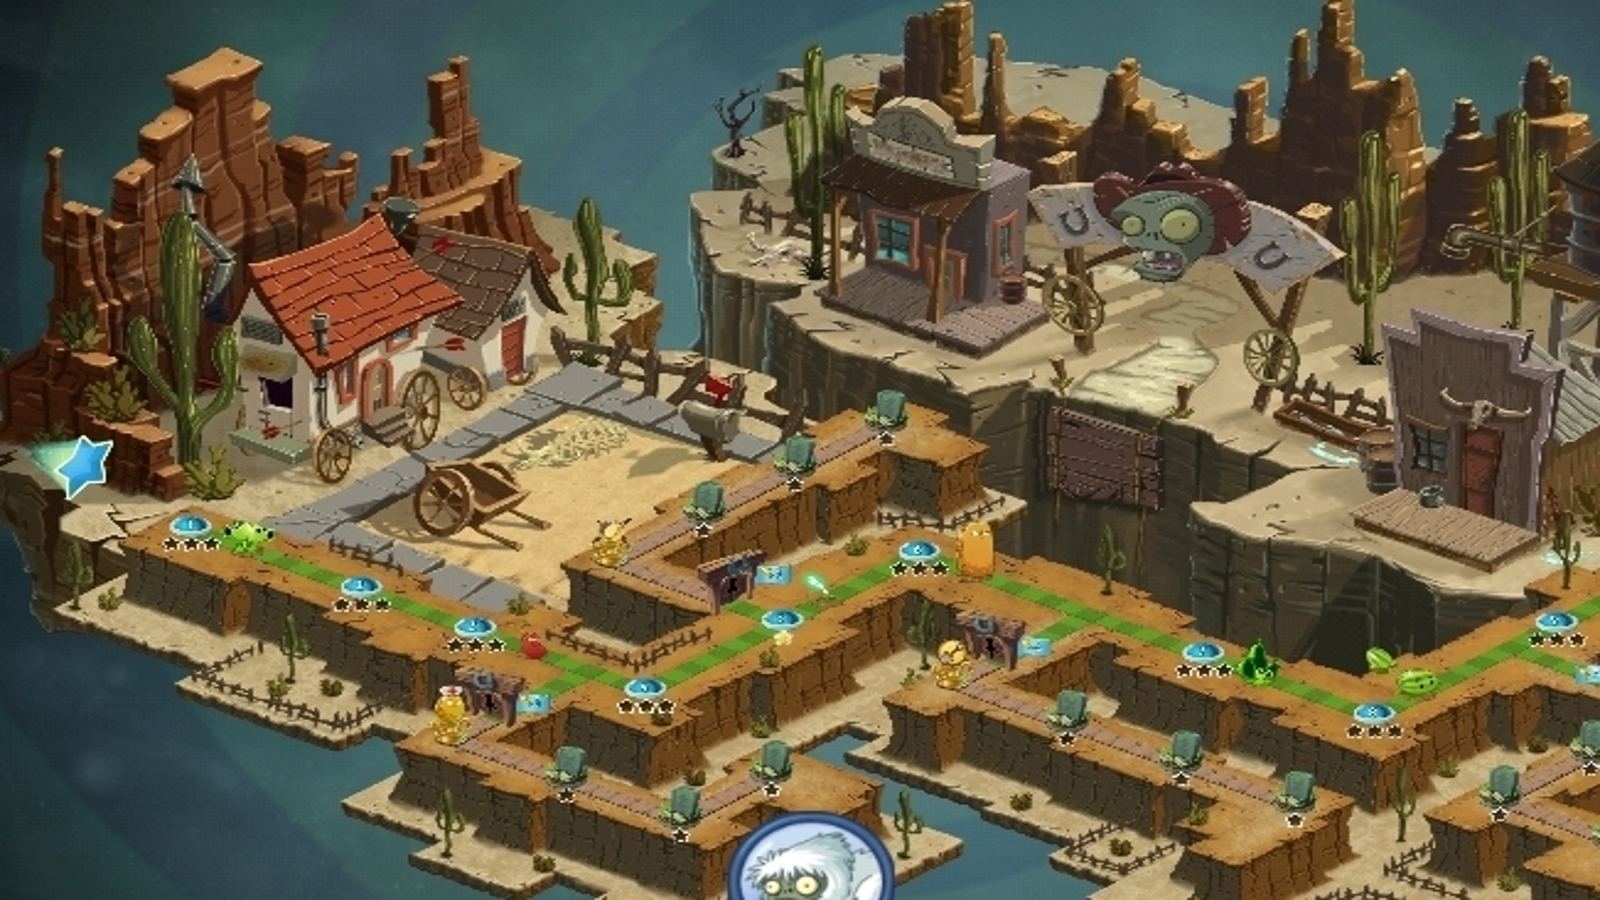 Plants vs. Zombies 2' Soft Launches in New Zealand and Australia